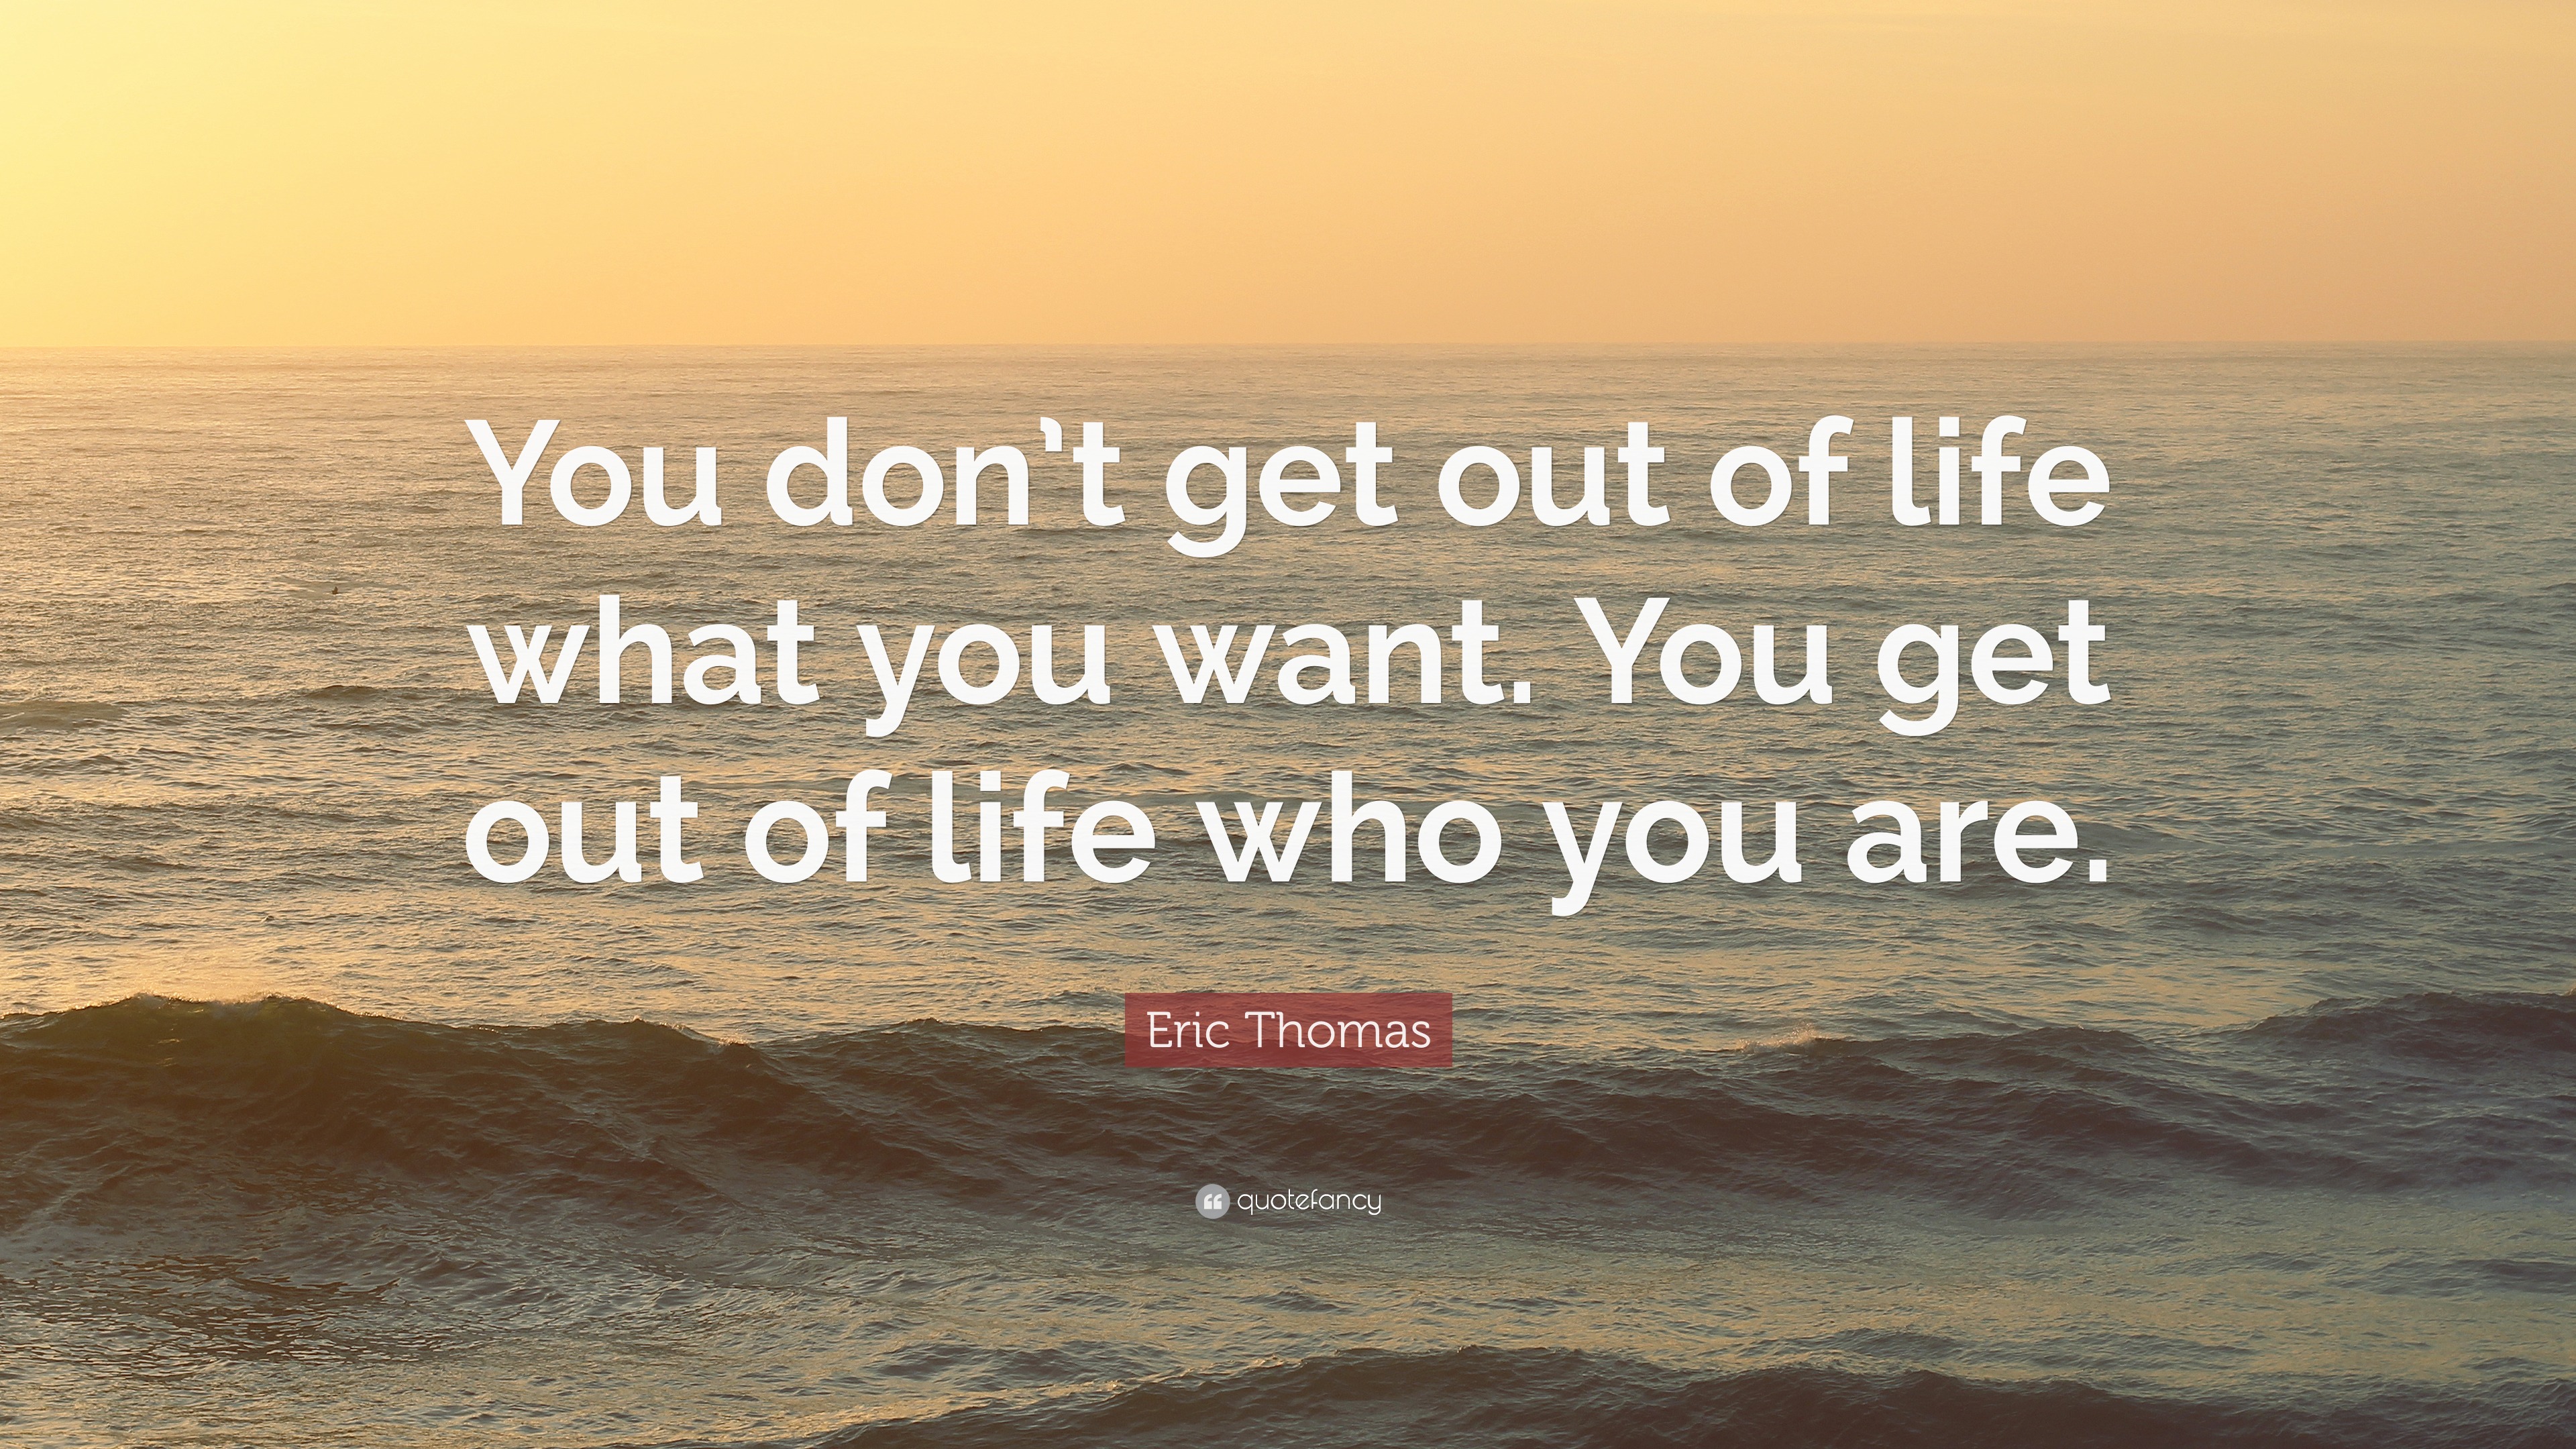 https://quotefancy.com/media/wallpaper/3840x2160/4415710-Eric-Thomas-Quote-You-don-t-get-out-of-life-what-you-want-You-get.jpg